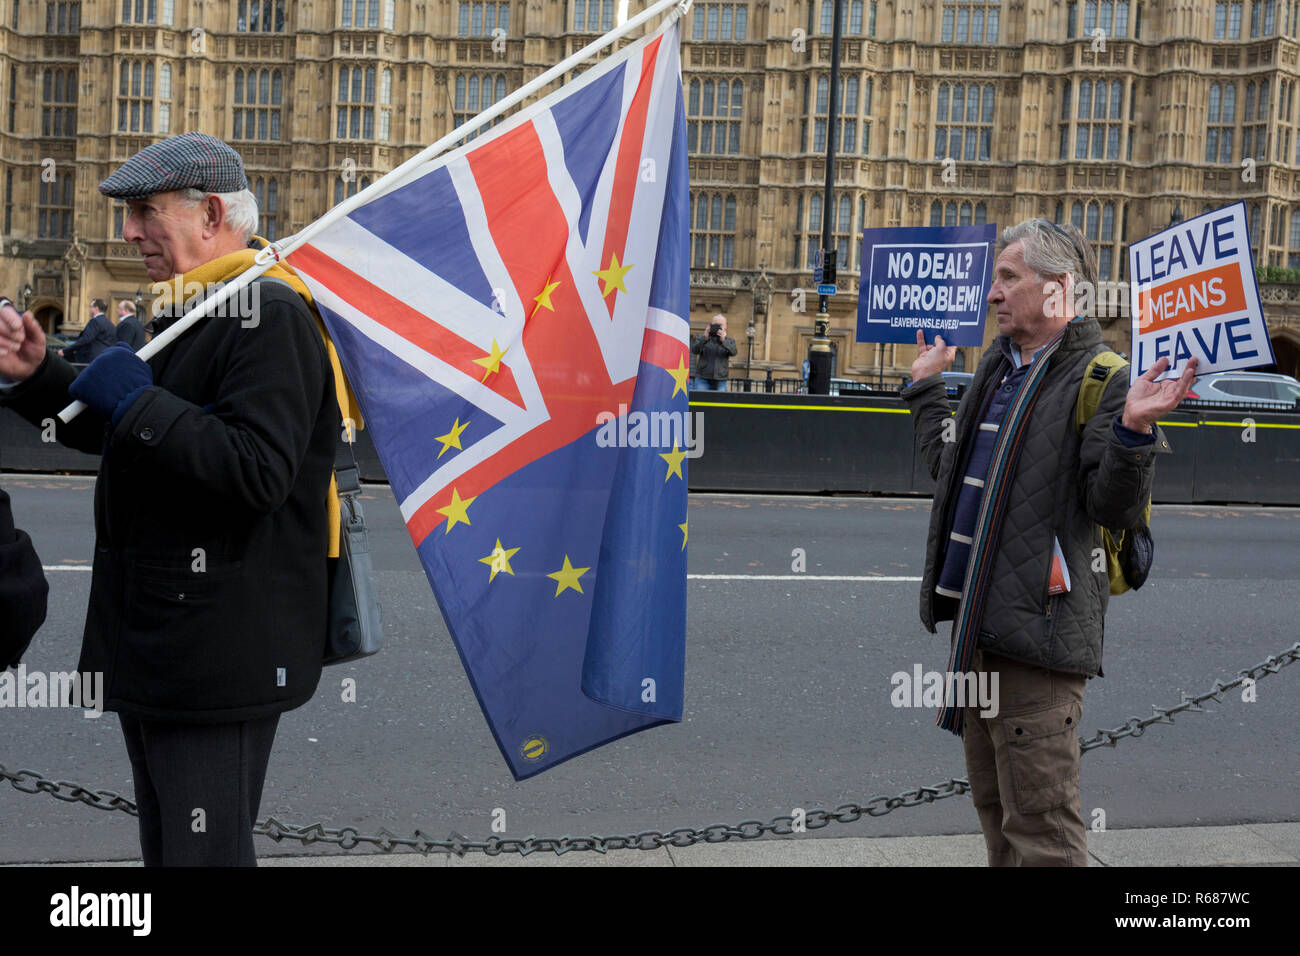 London UK, 4th December 2018: As Prime Minister Theresa May prepares to sell her Brexit deal ahead of five days of debate and eventual vote in parliament, both pro-EU Remainers and Brexiteers argue outside the House of Commons. This week will be a vital step for May's Premiership and the UK's Brexit status.  Photo by Richard Baker / Alamy Live News. Stock Photo